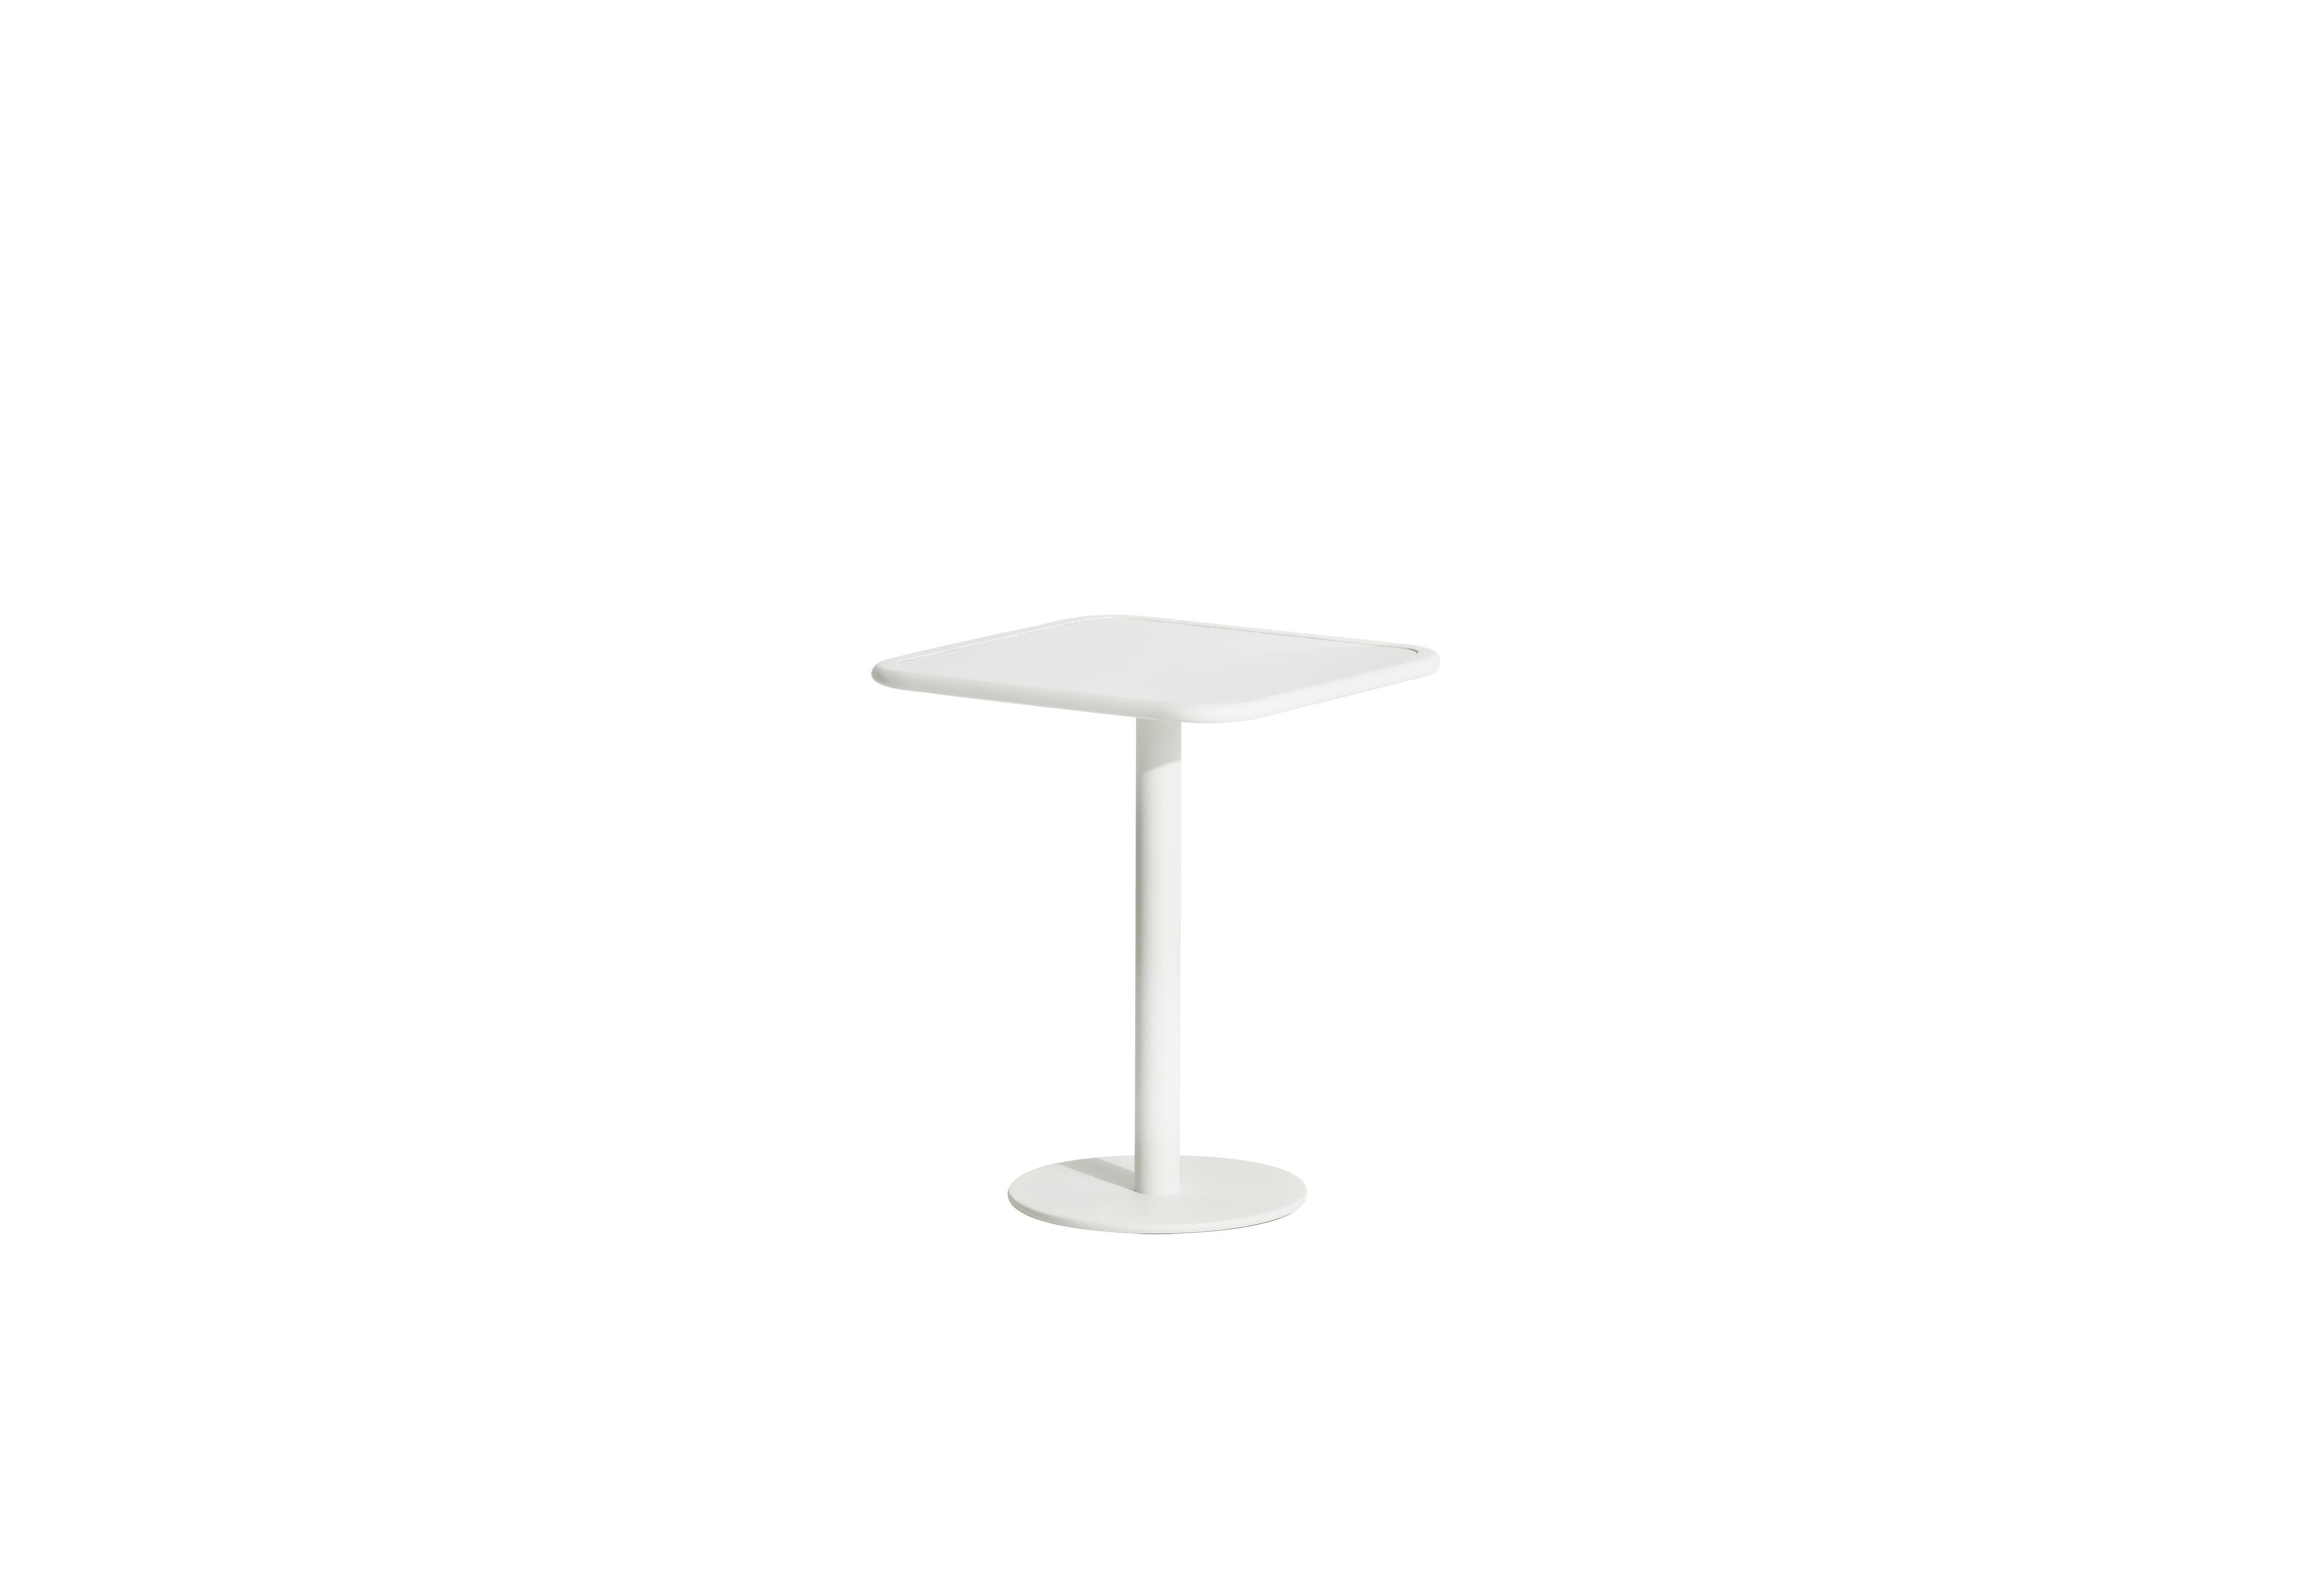 Petite Friture Week-End Bistro Square Dining Table in White Aluminium by Studio BrichetZiegler, 2017

The week-end collection is a full range of outdoor furniture, in aluminium grained epoxy paint, matt finish, that includes 18 functions and 8